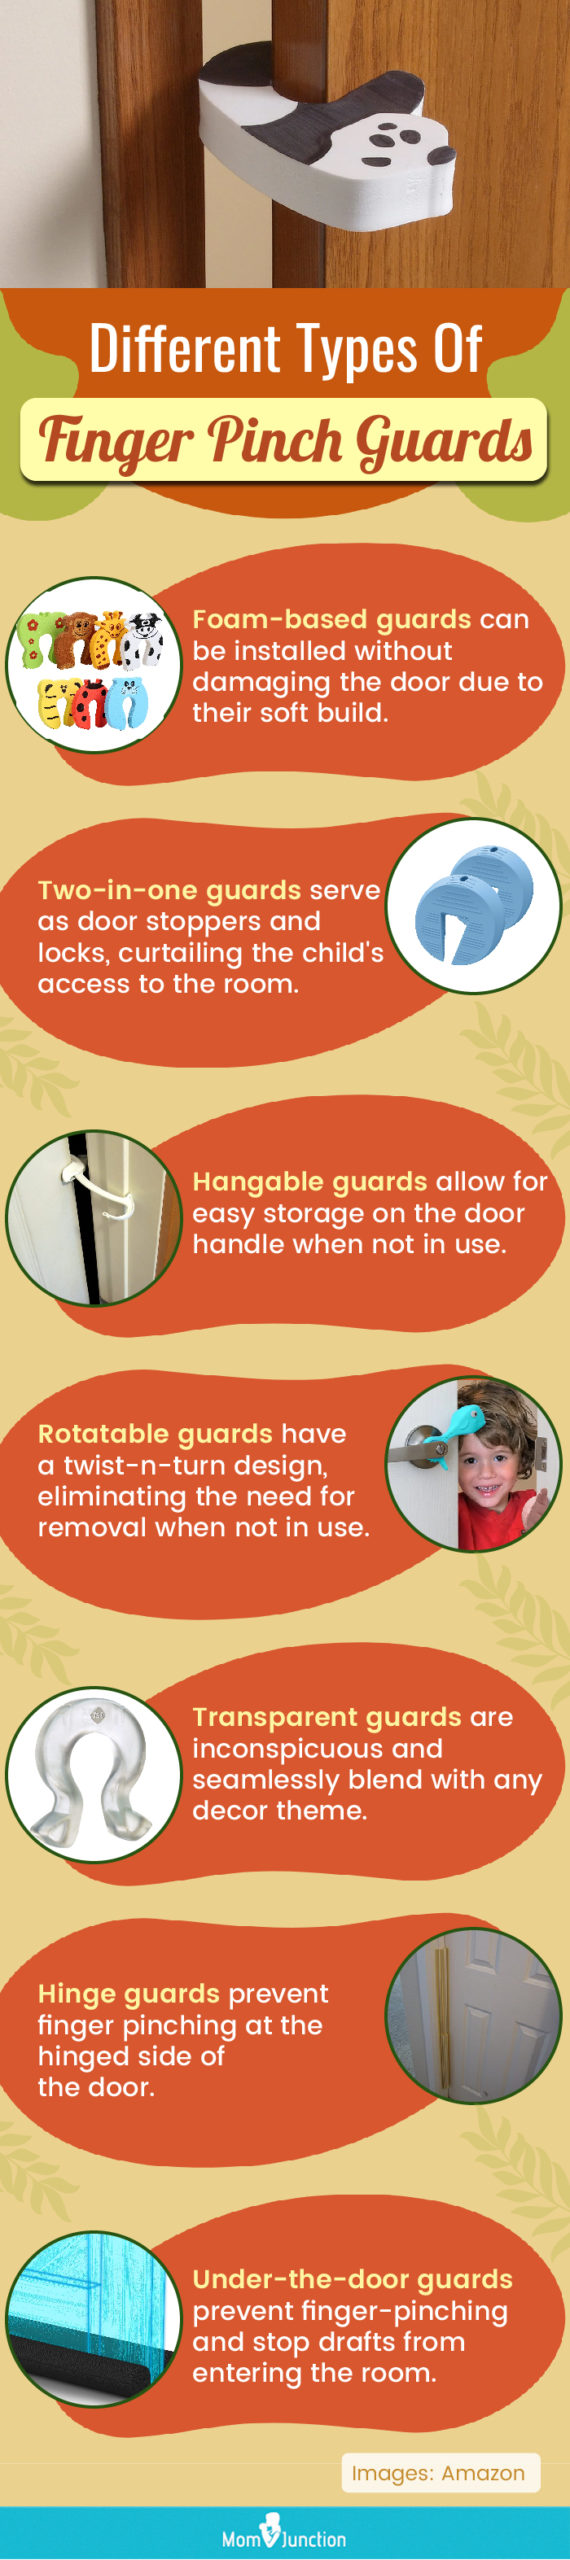 Different Types Of Finger Pinch Guards(infographic)